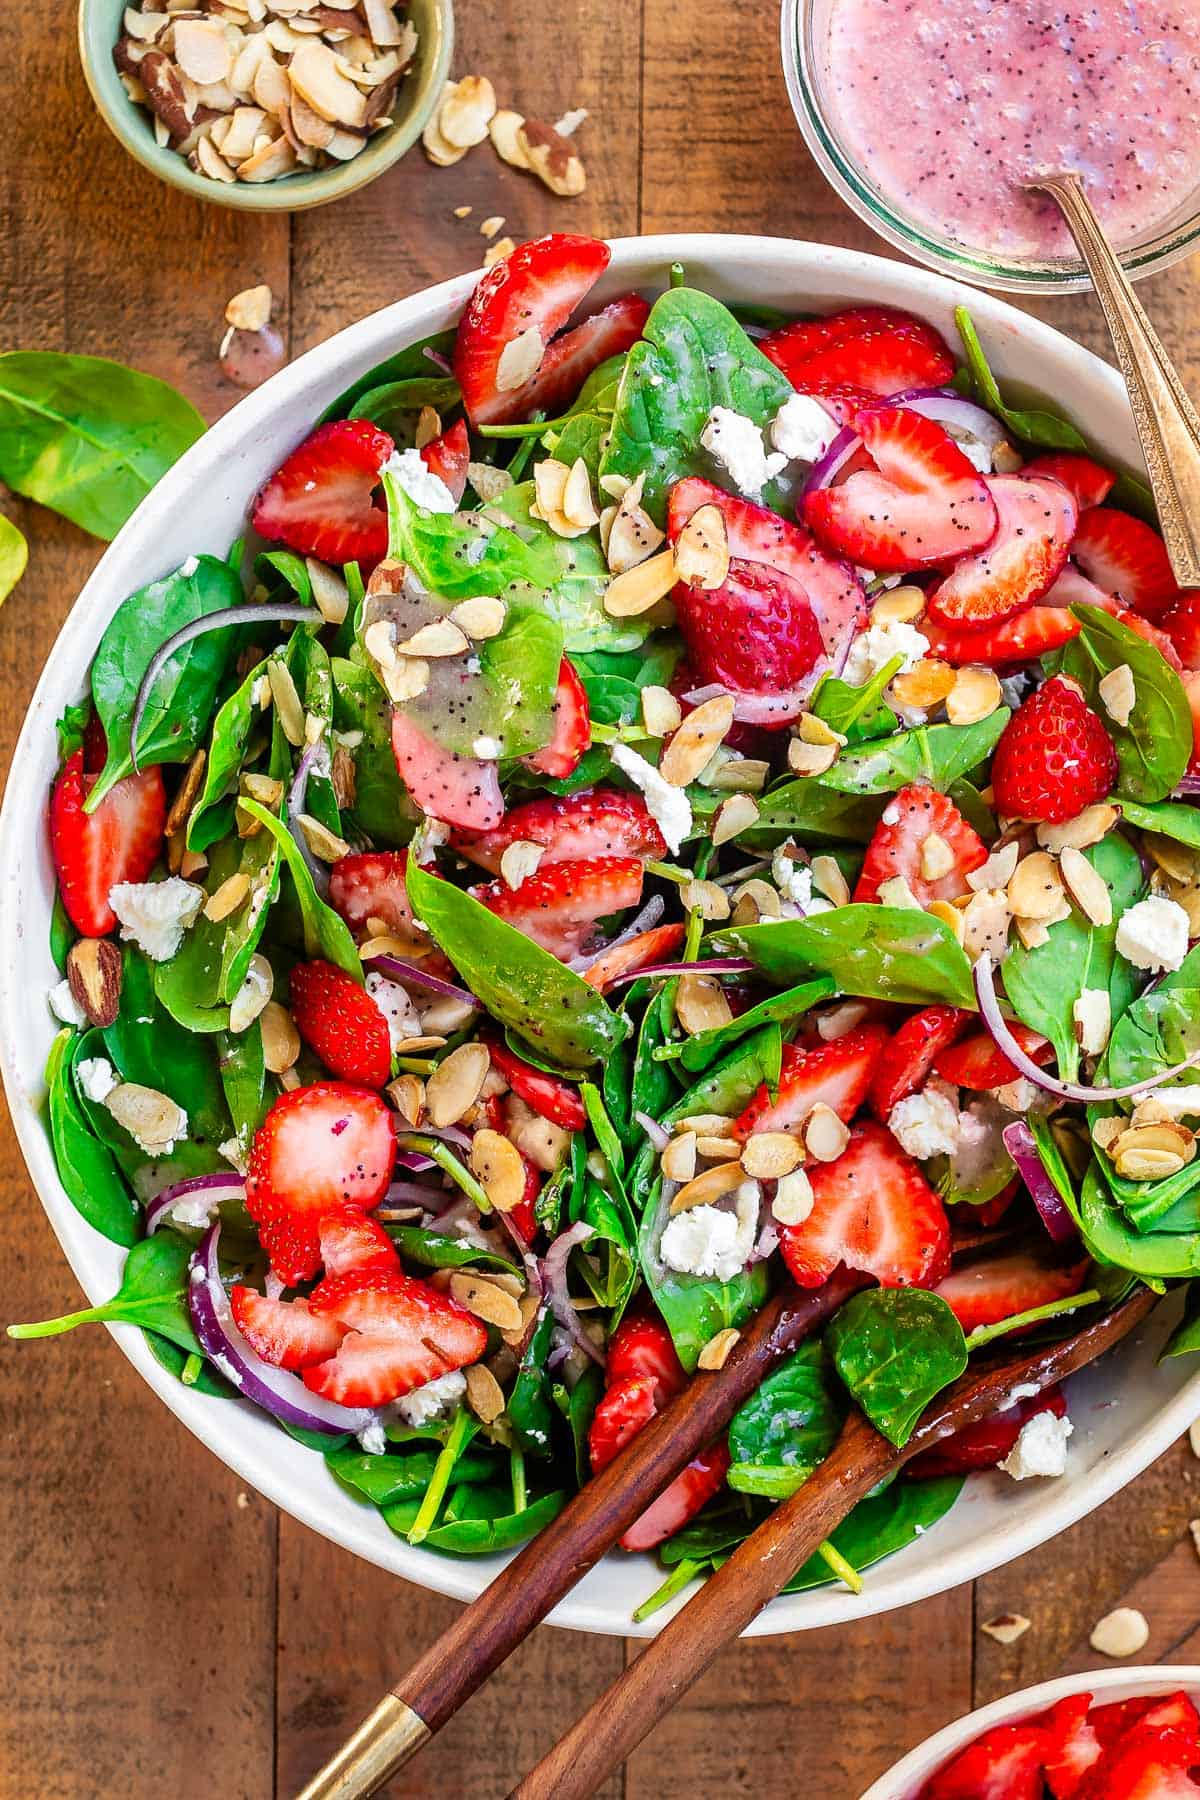 dressed strawberry spinach salad with poppyseed dressing ready to serve with tongs.